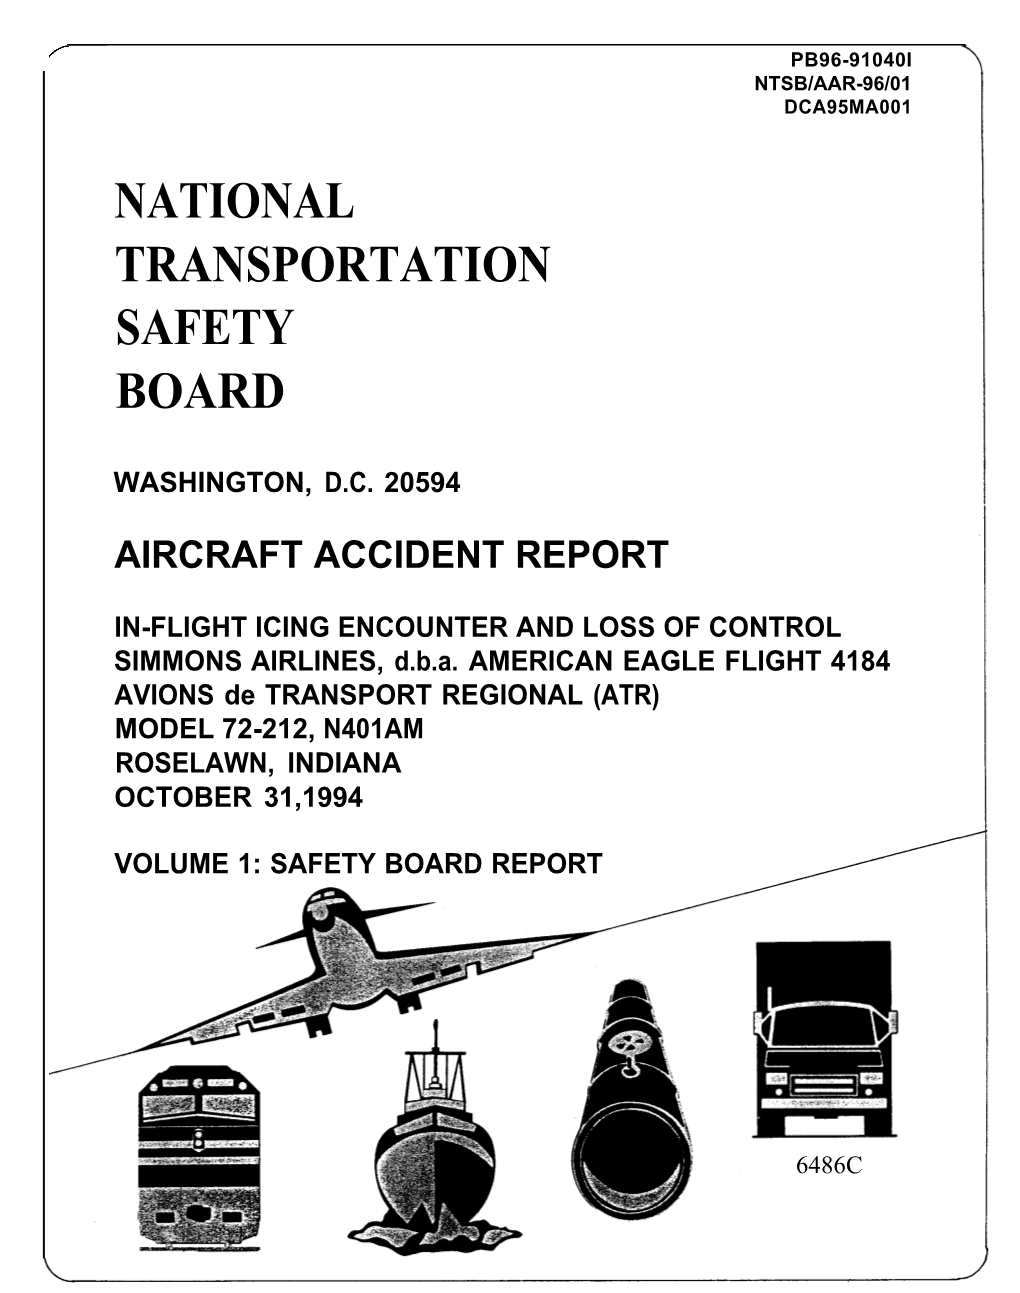 In-Flight Icing Encounter and Loss of Control, Simmons Airlines, D.B.A